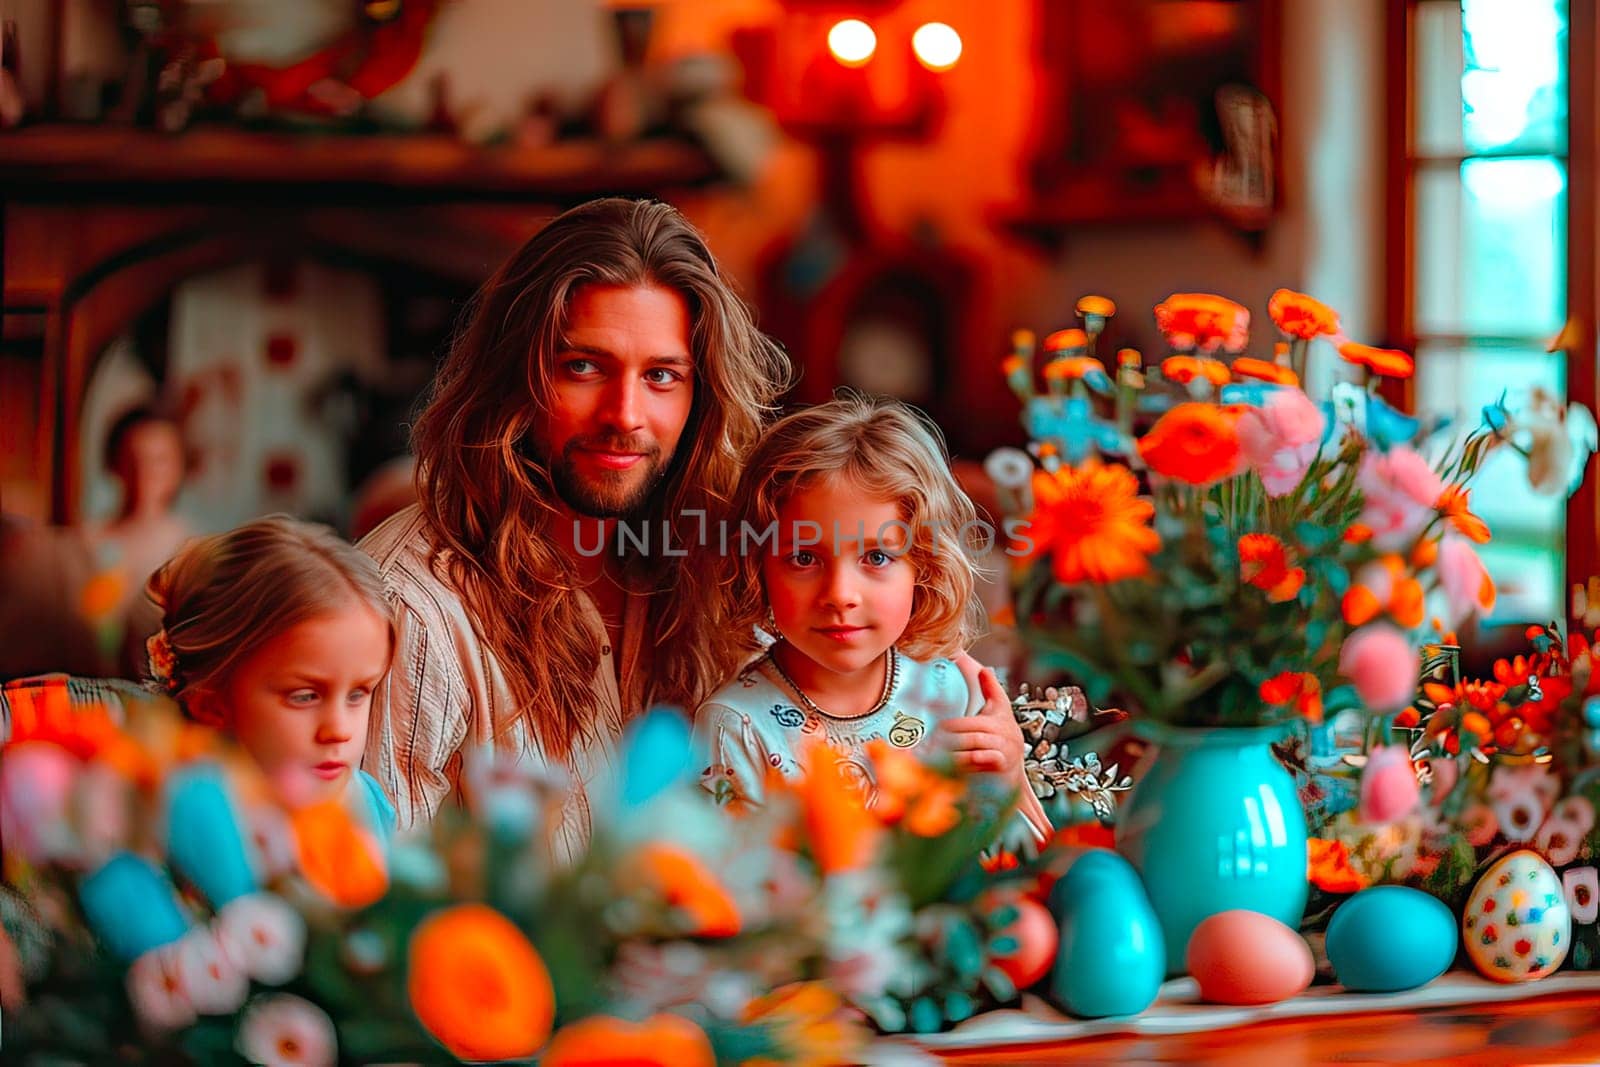 In the foreground, you can see flowers in vases and numerous Easter eggs. A father and two daughters sit in the background. They are celebrating Easter together.